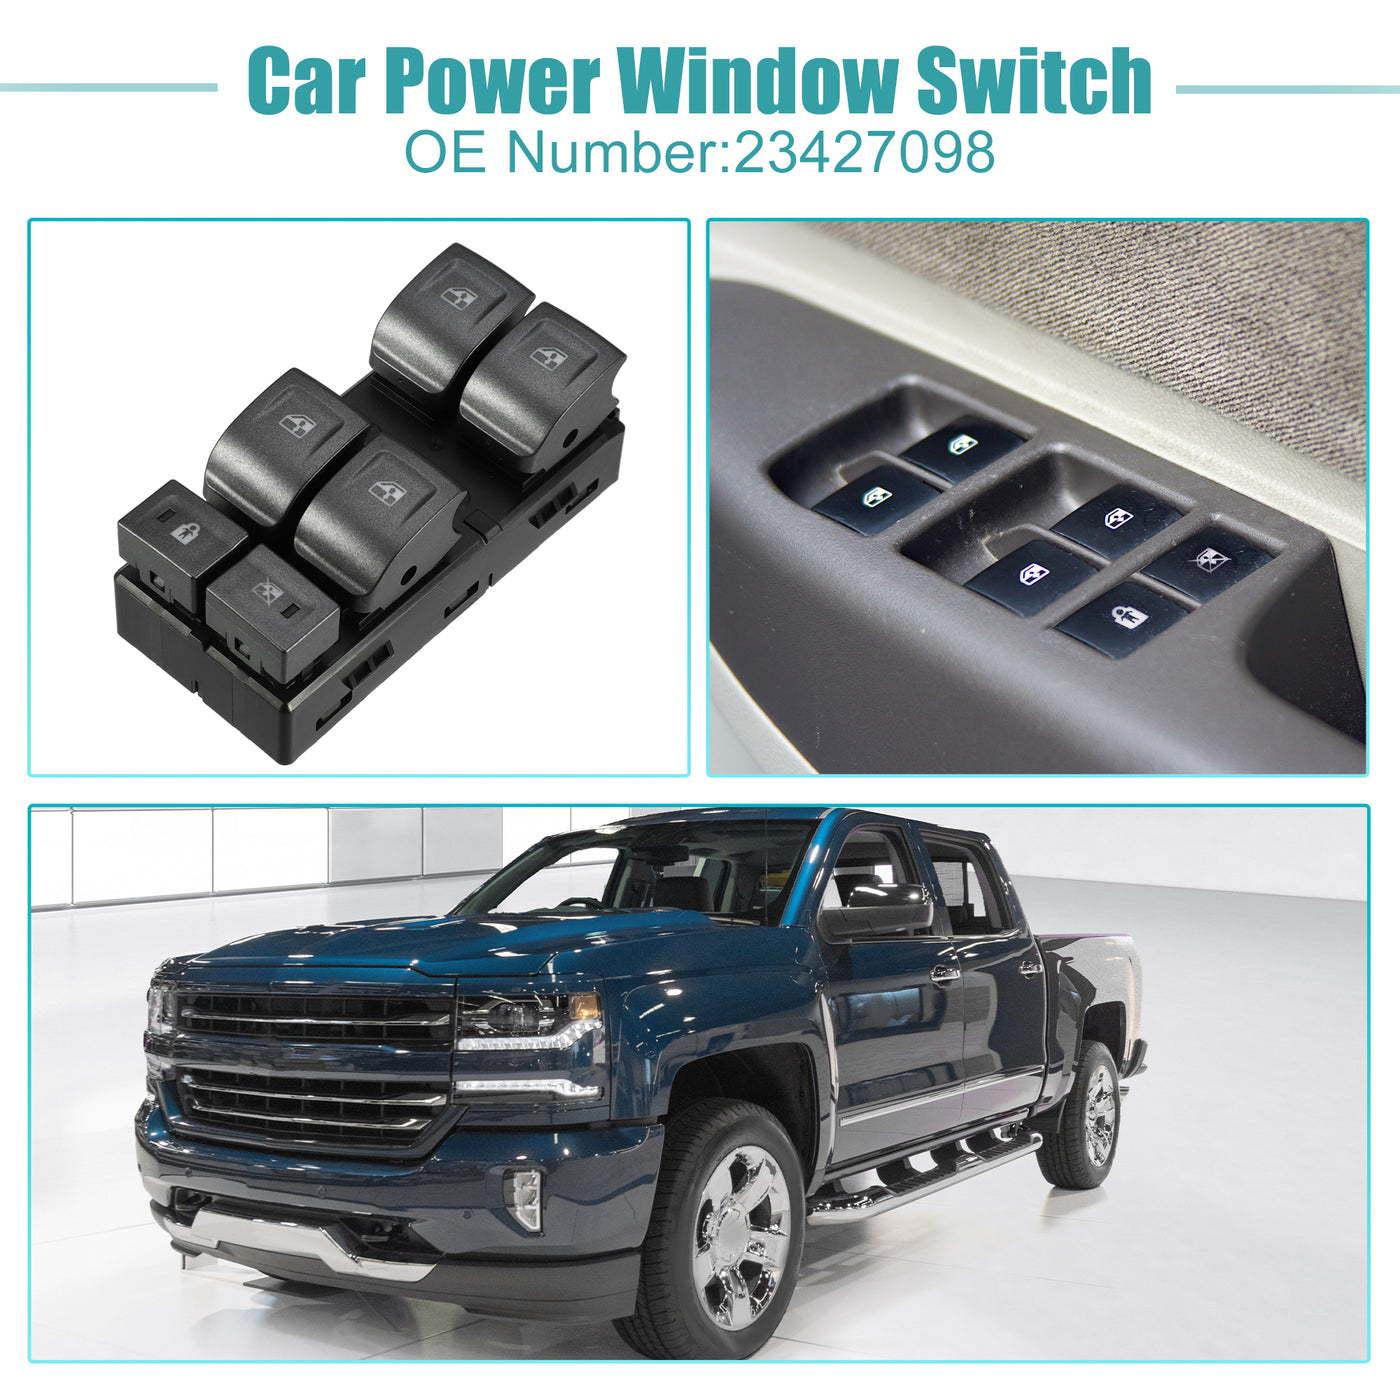 ACROPIX Power Window Switch Window Control Switch Fit for Chevrolet Colorado 2015 for GMC Canyon 2016 with Removal Tool No.23427098 - Pack of 1